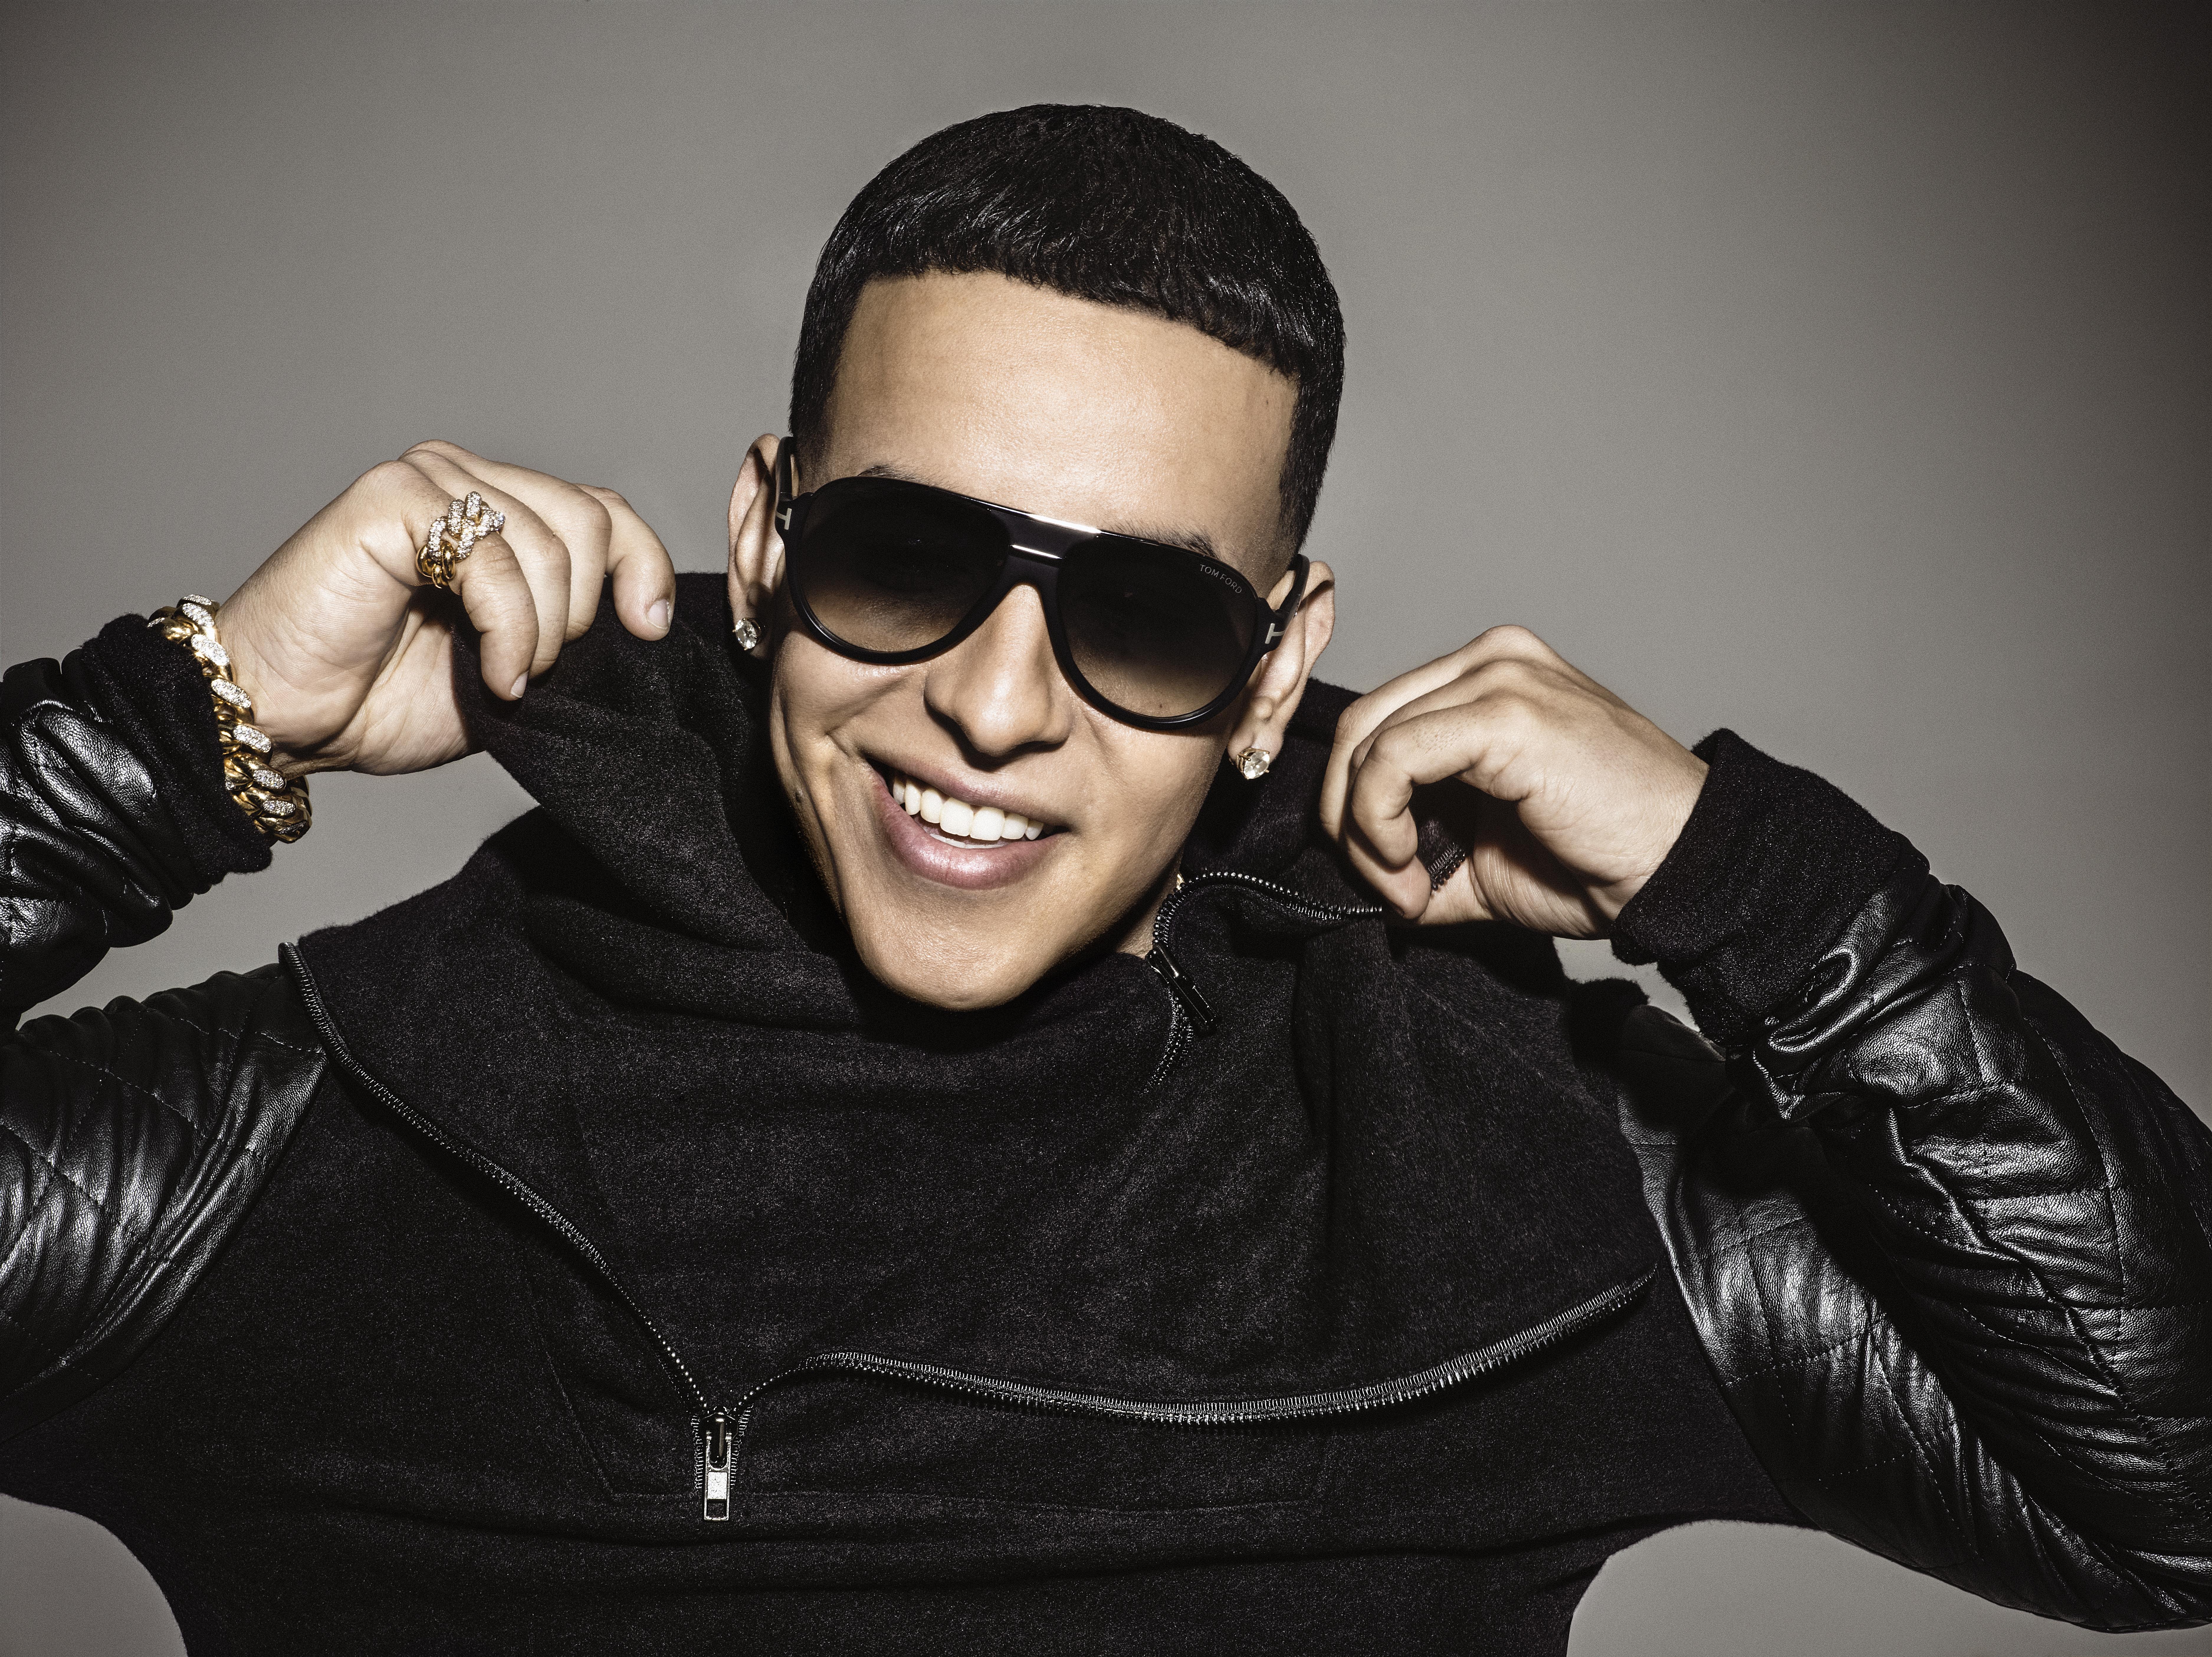 Daddy Yankee tour 2022: How to buy tickets, schedule, dates 